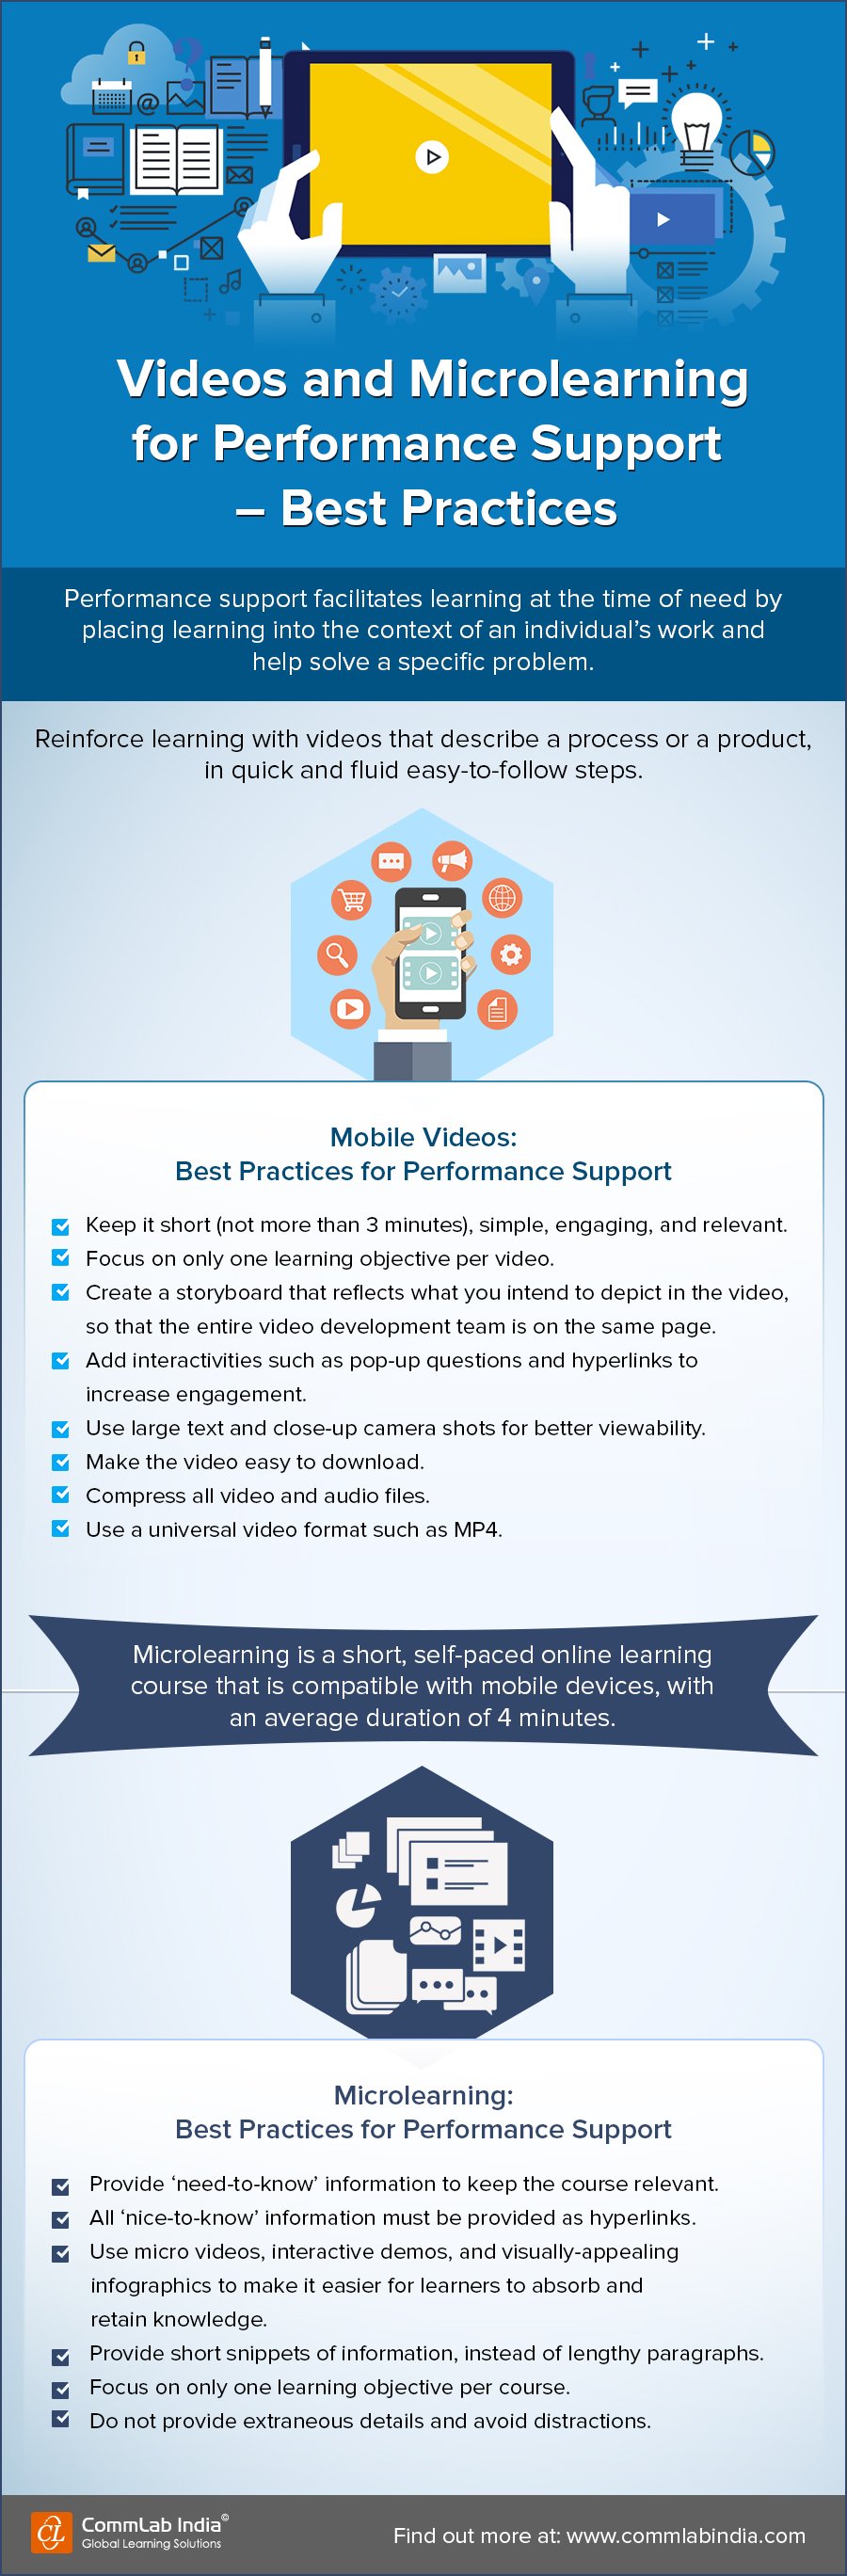 Videos and Microlearning for Performance Support – Best Practices [Infographic]